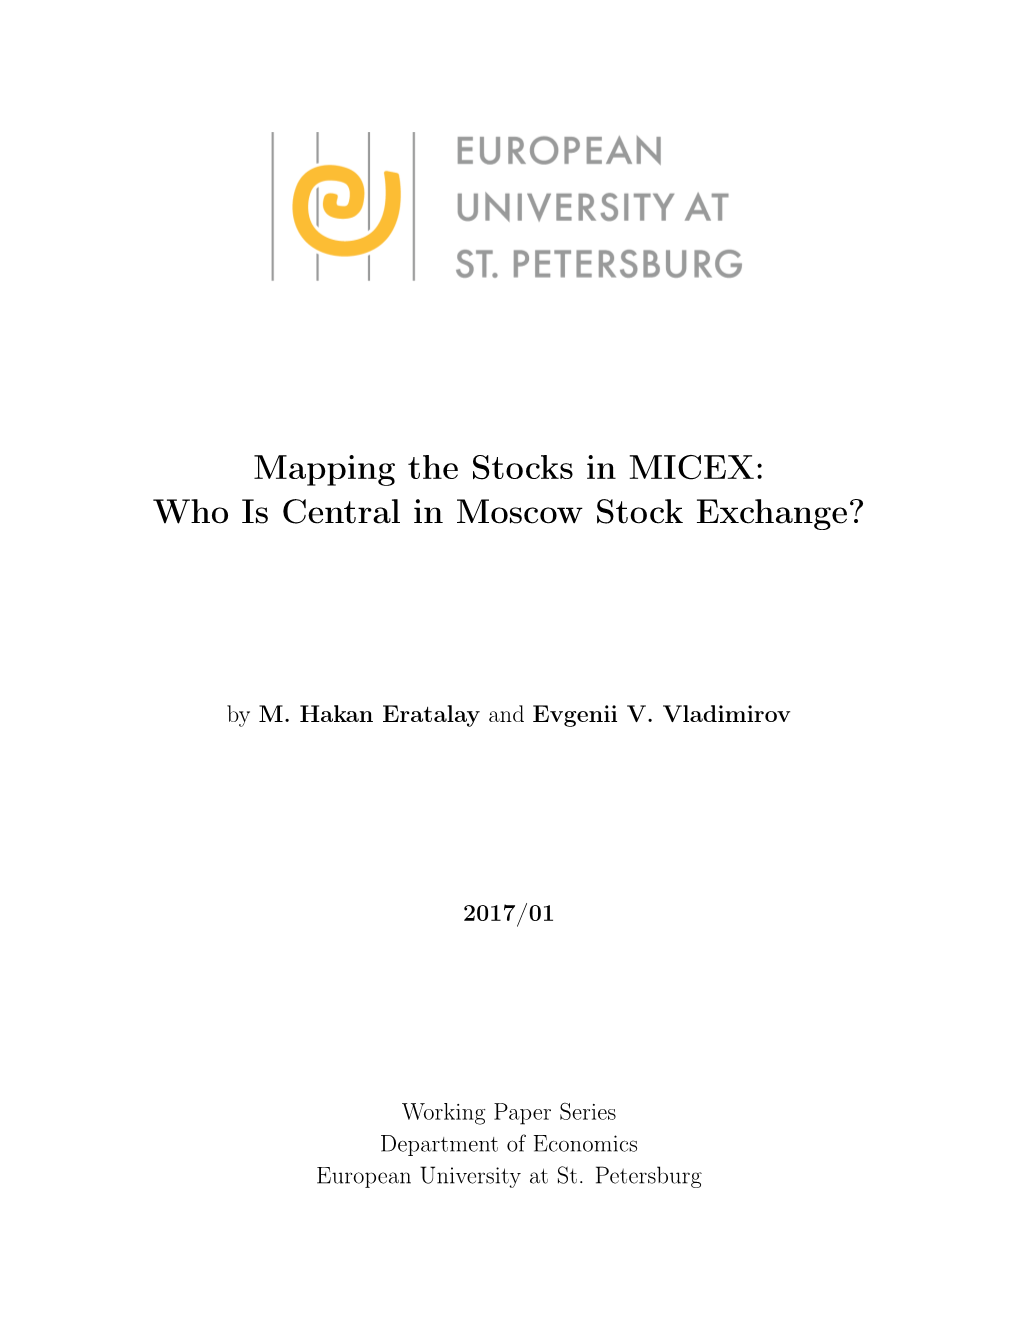 2017/01, Mapping the Stocks in MICEX: Who Is Central in Moscow